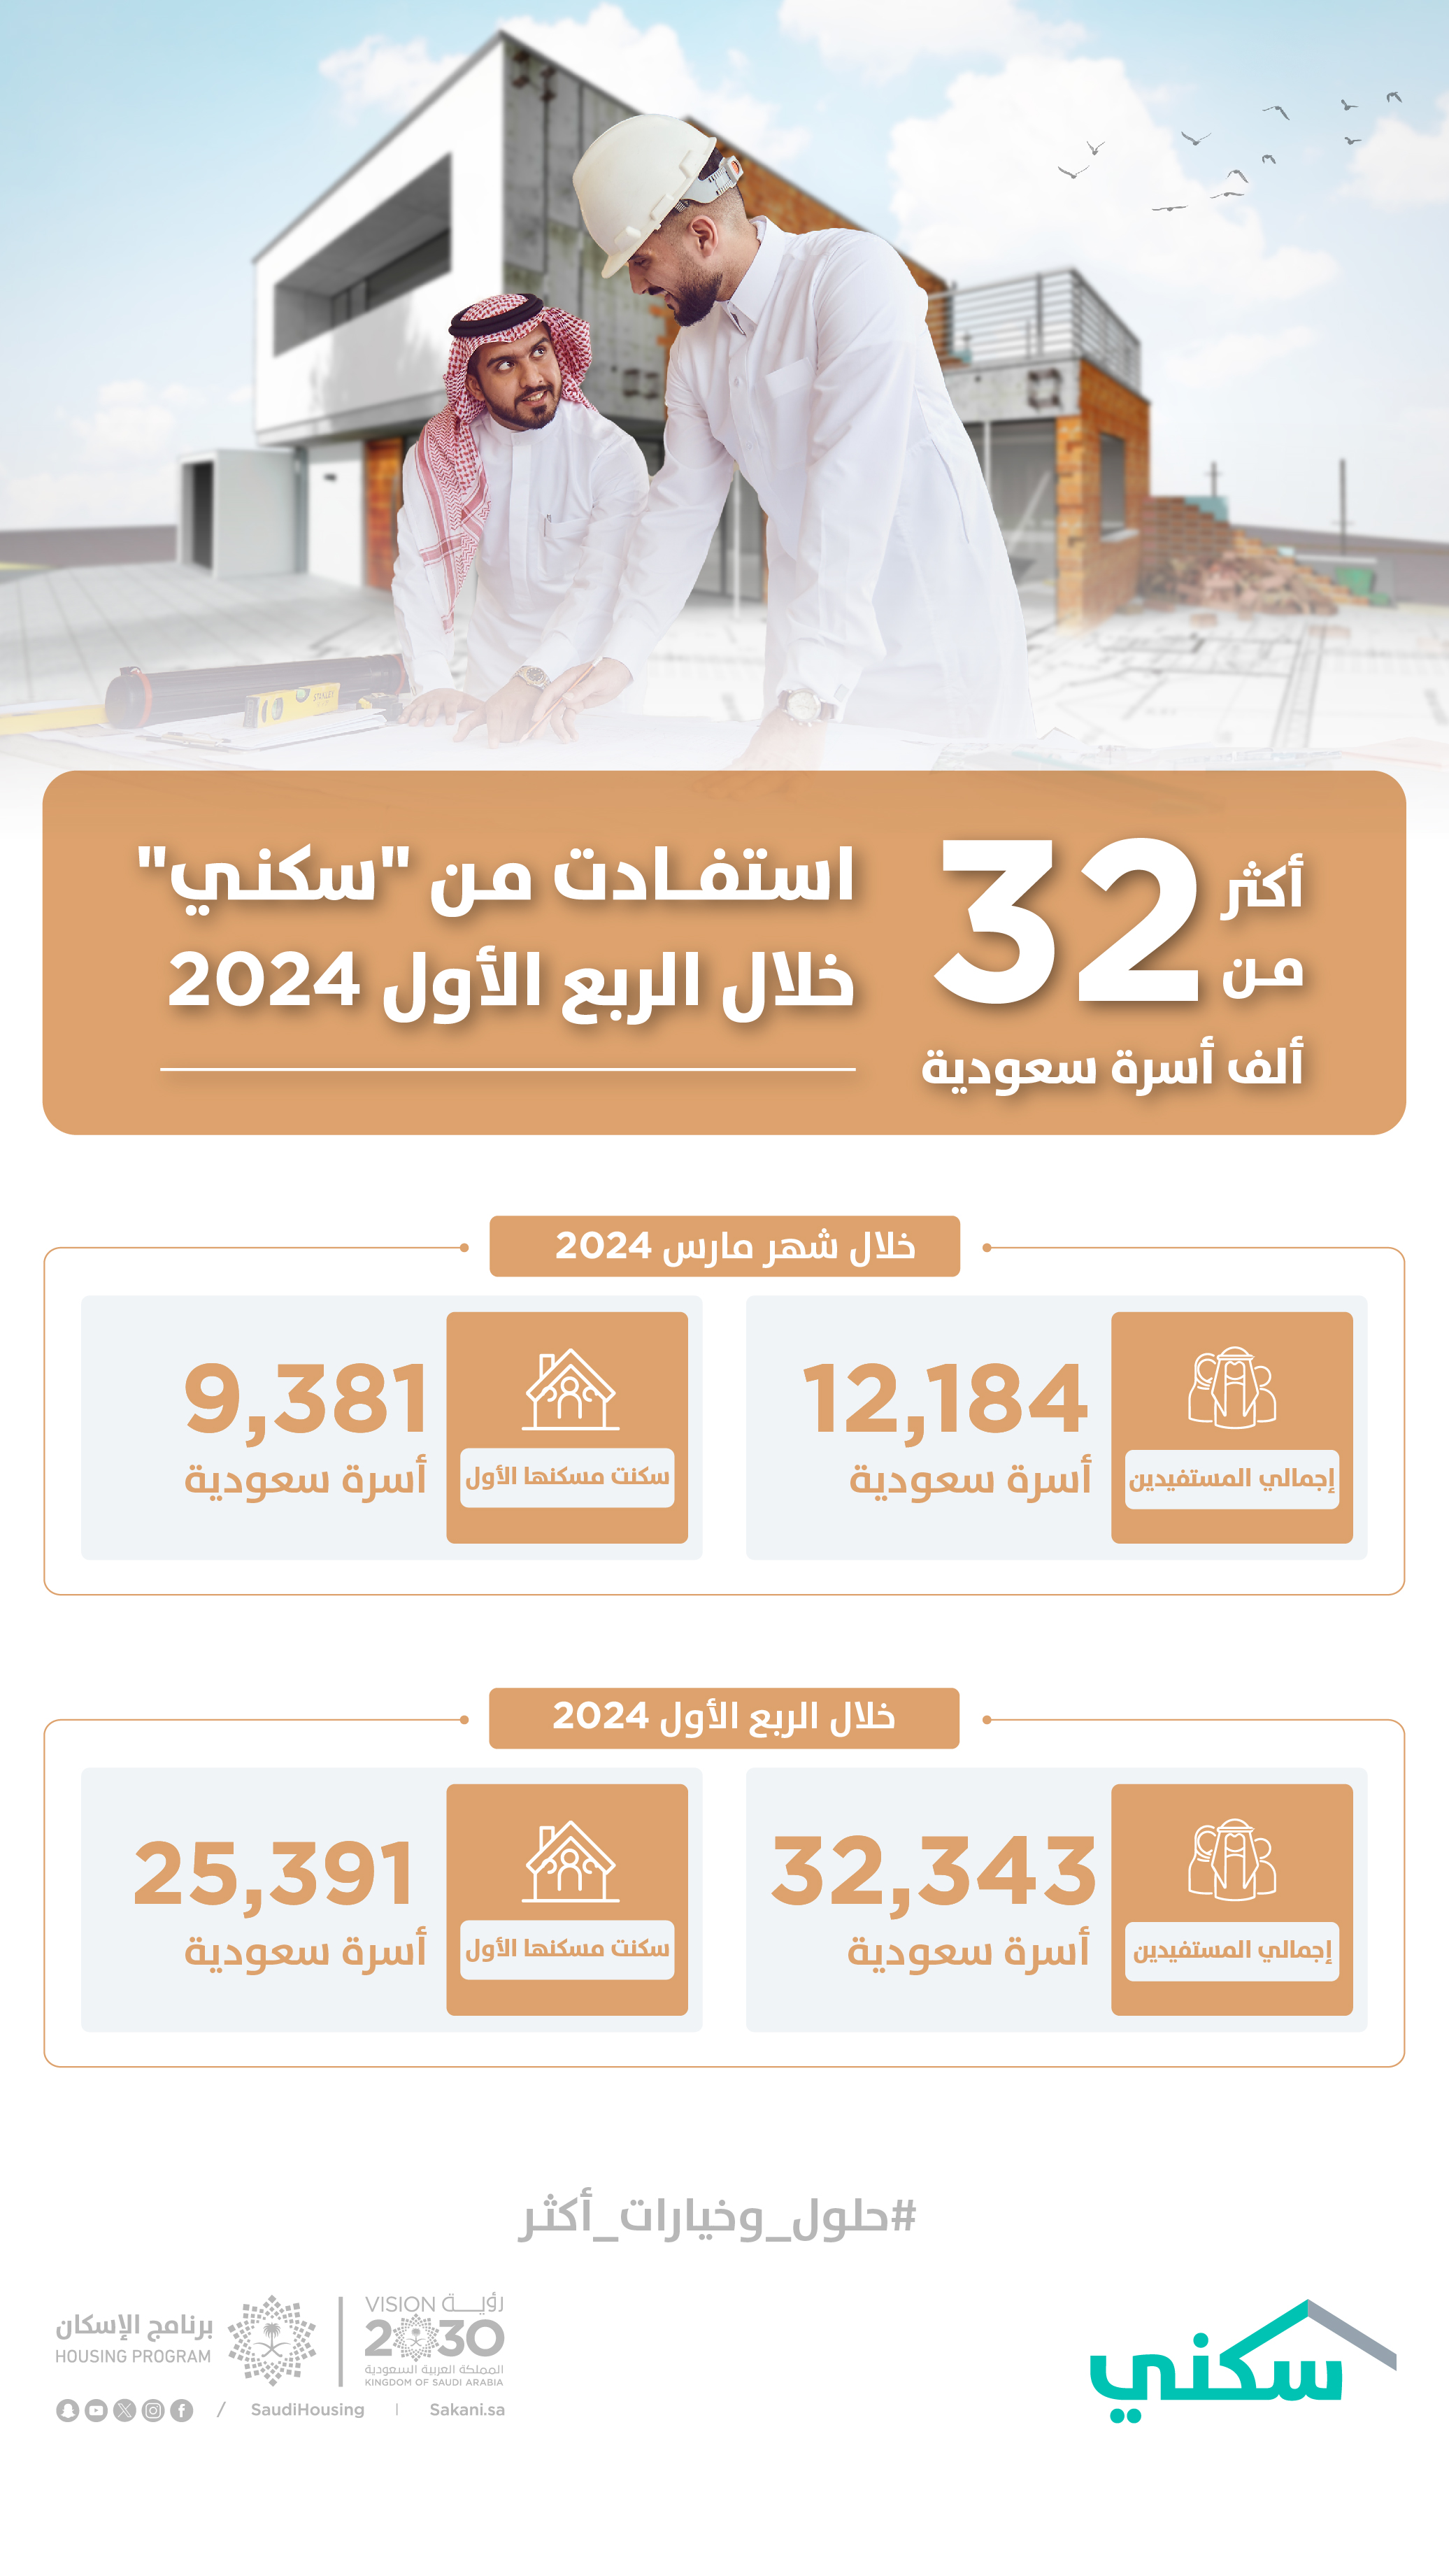 Over 32 thousand families benefited from Sakani during the first quarter of 2024; an increase of more than 15% compared to last year